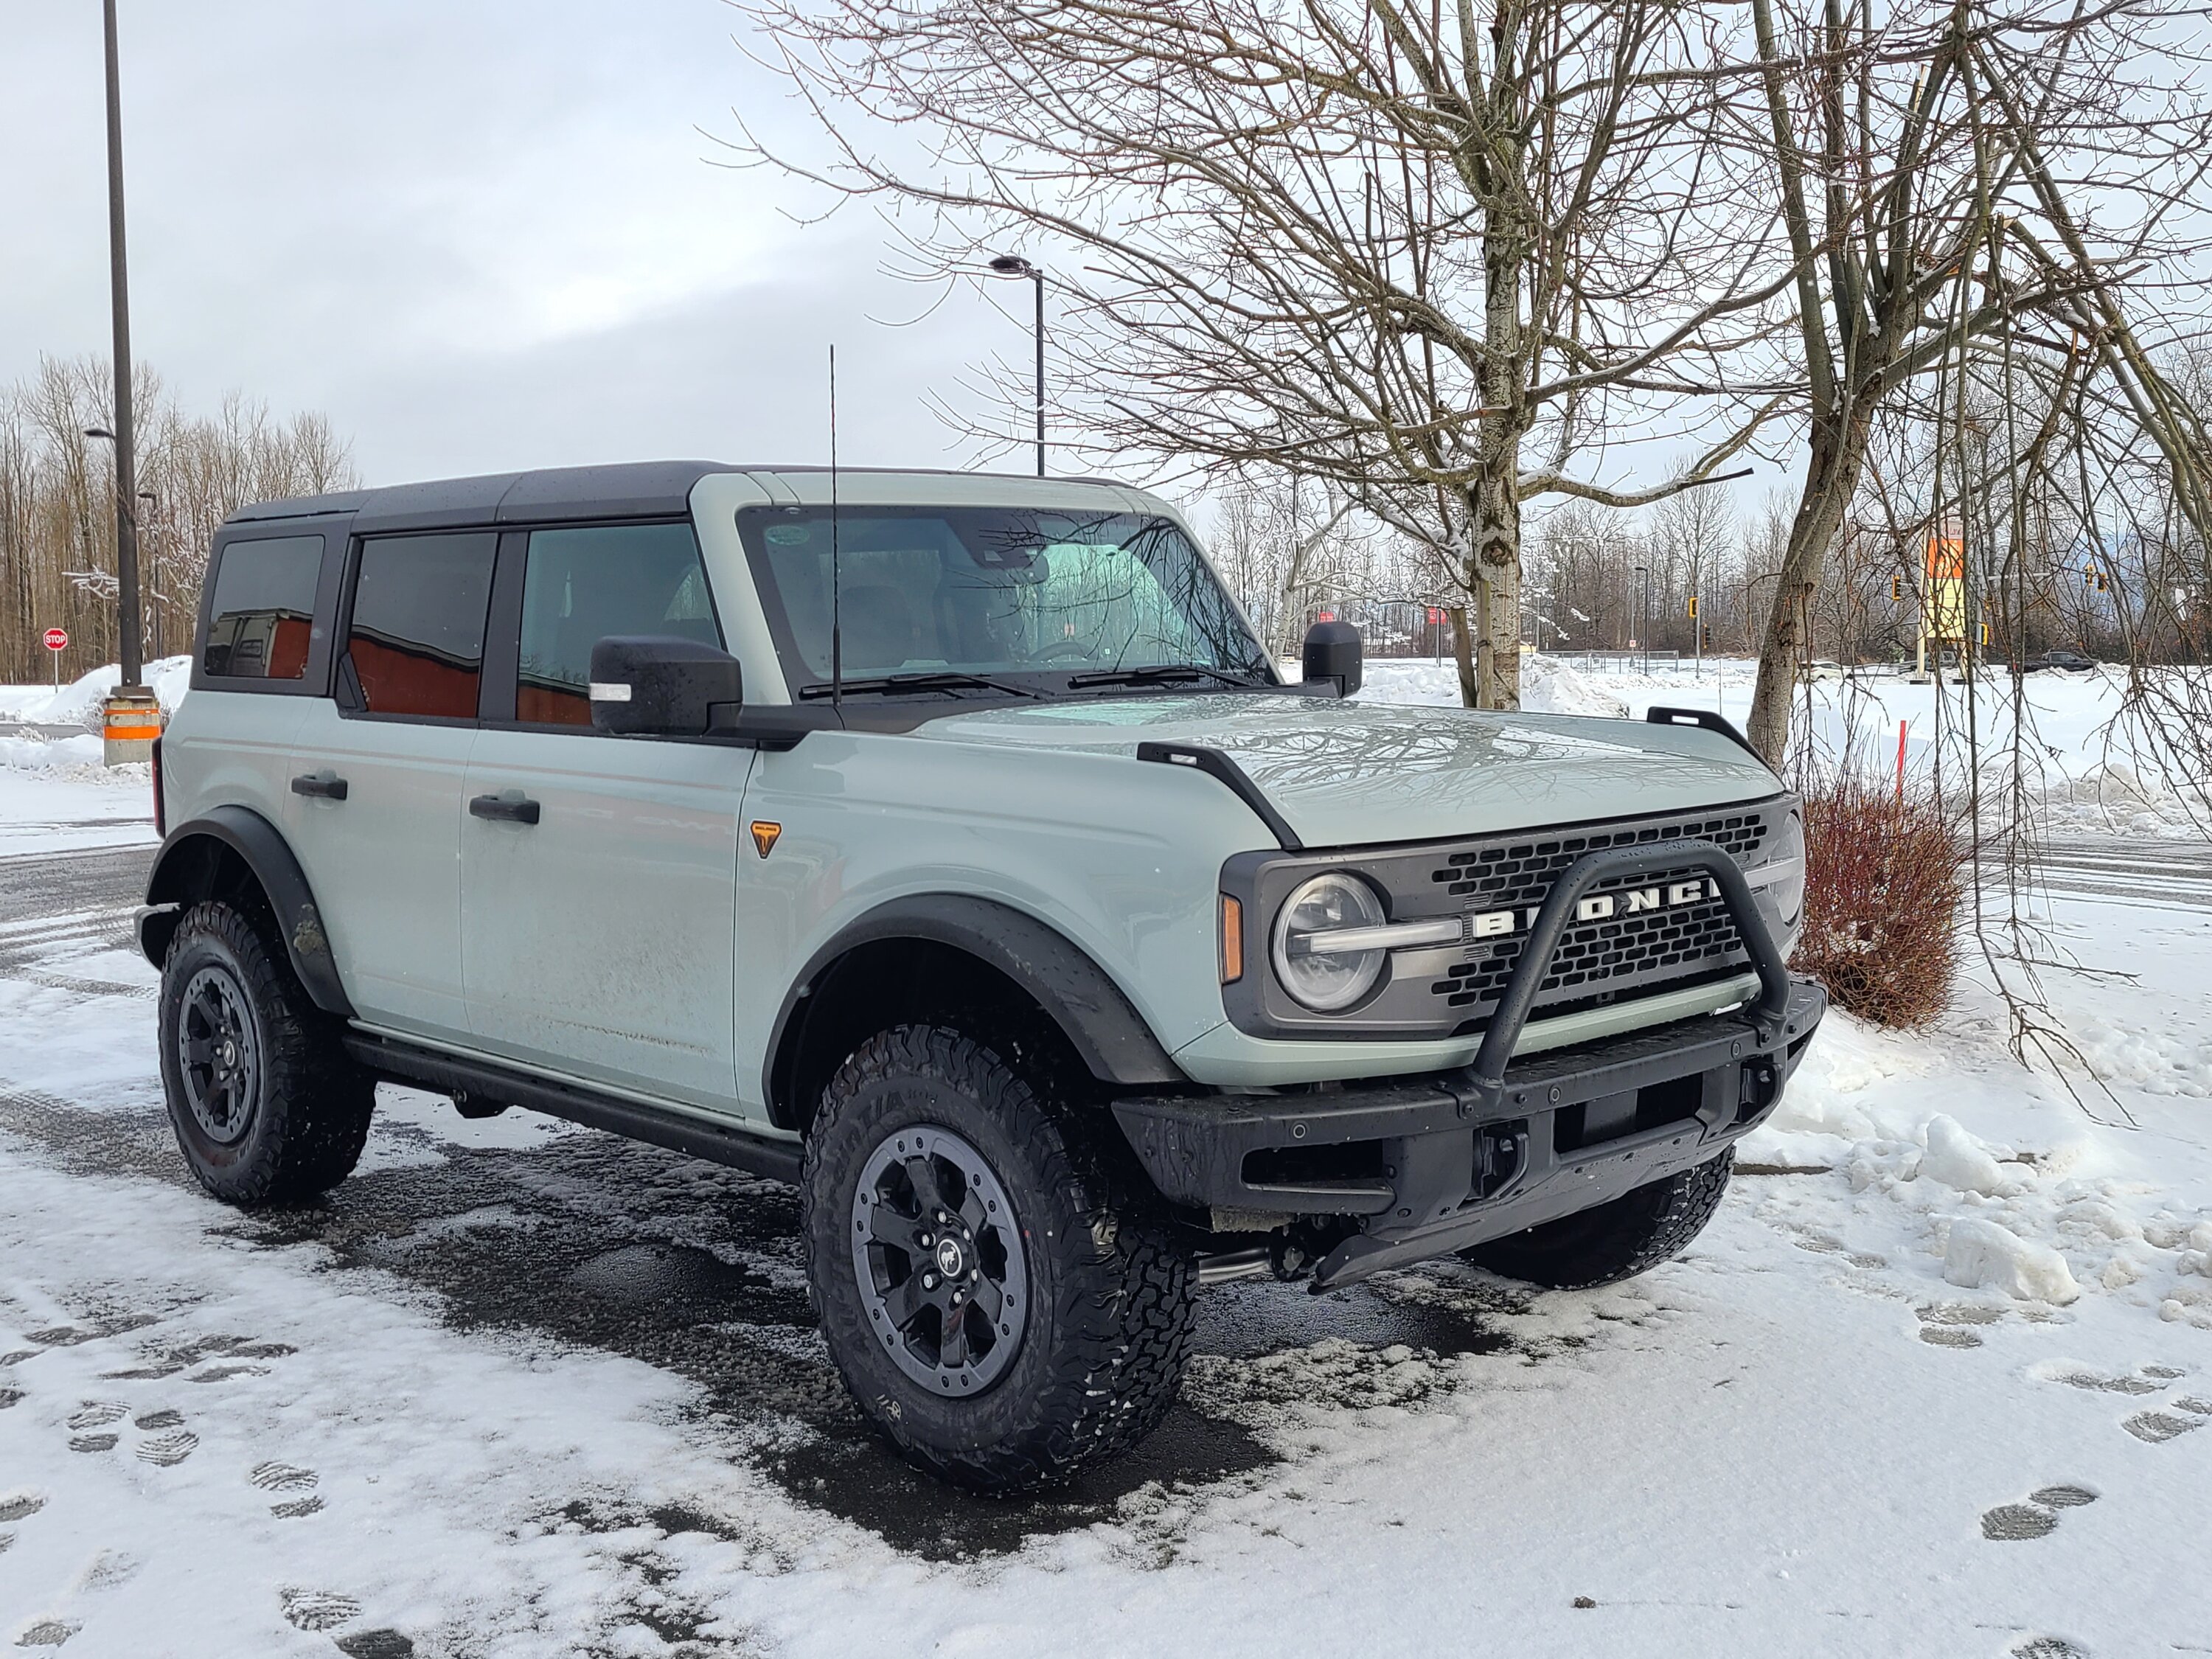 Ford Bronco Badlands Non-SAS - Your Thoughts & Pics? 20220108_123327